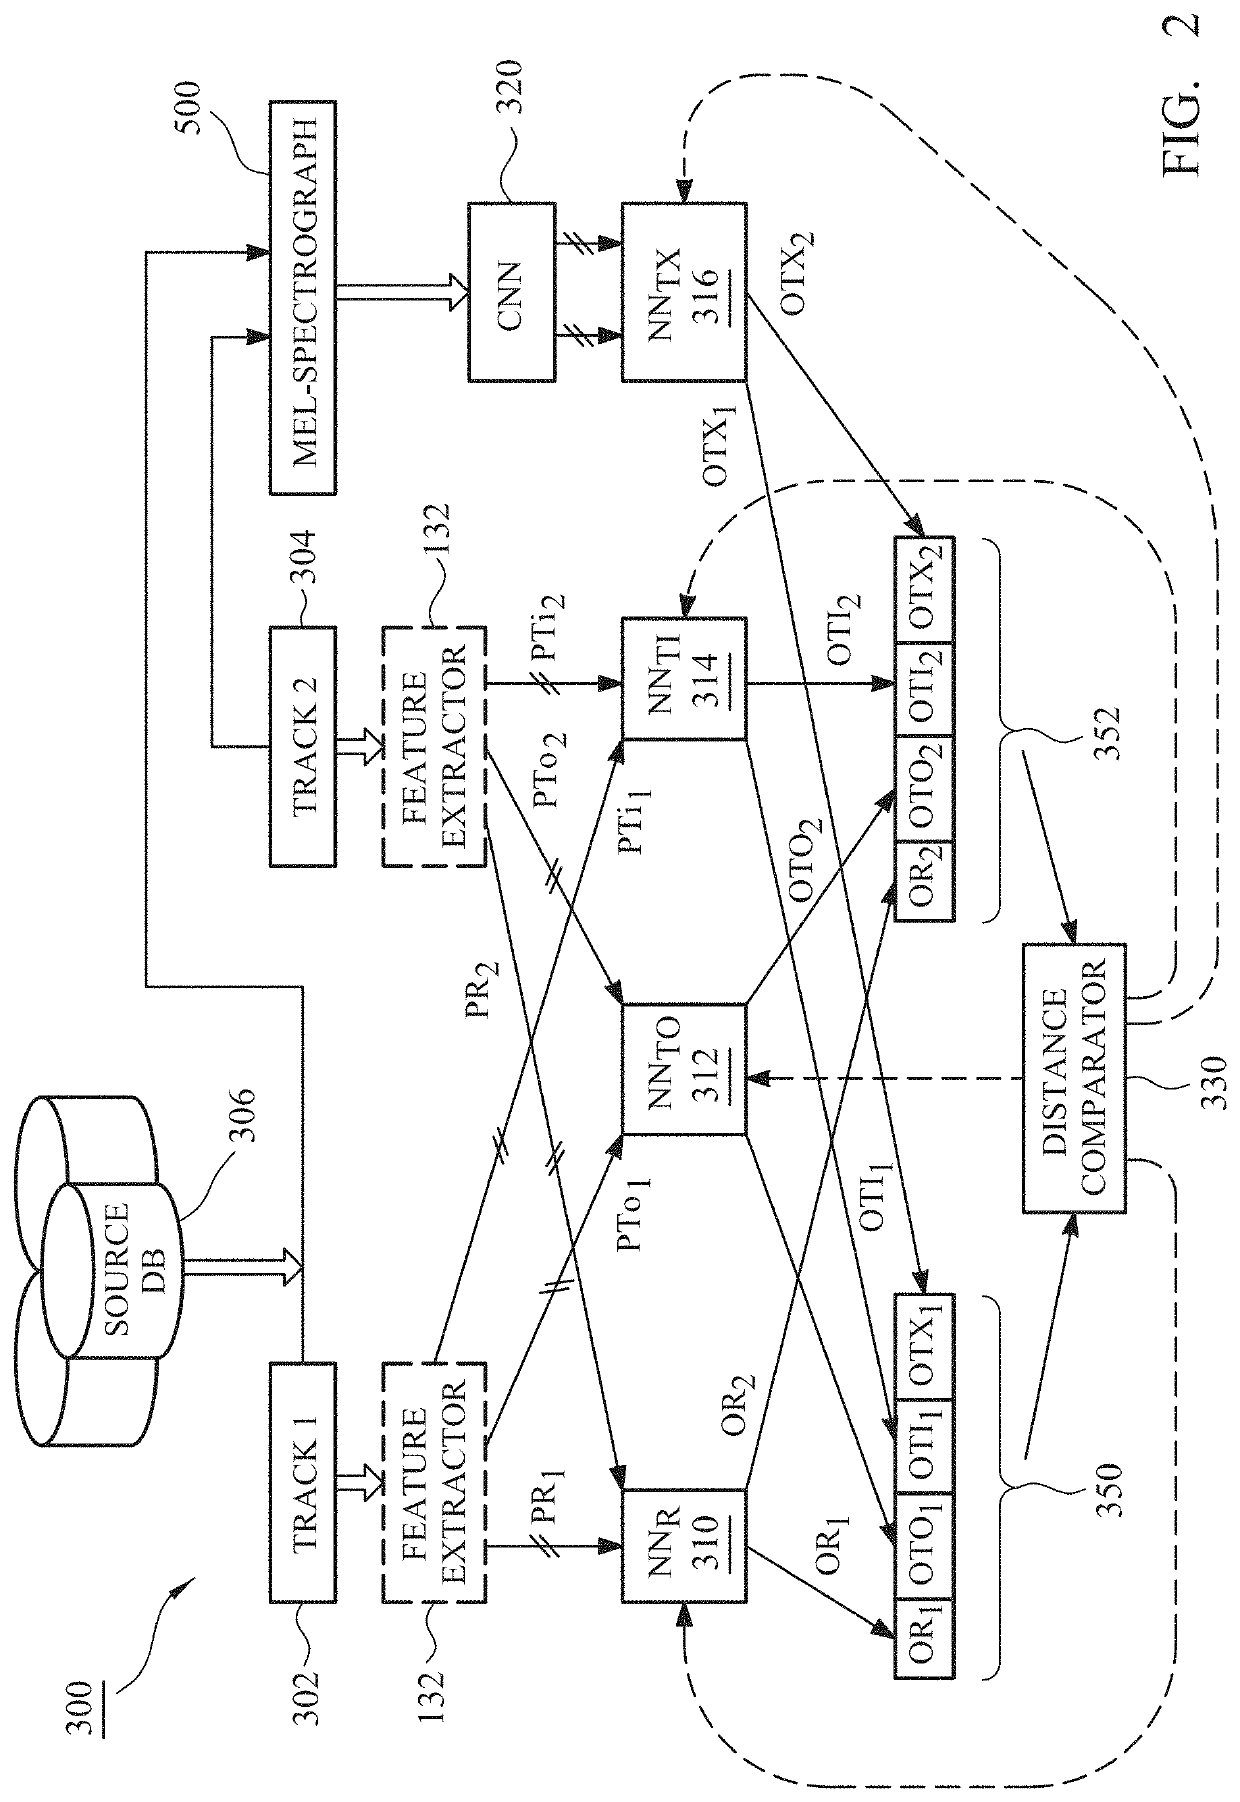 System and Method for Recommending Semantically Relevant Content